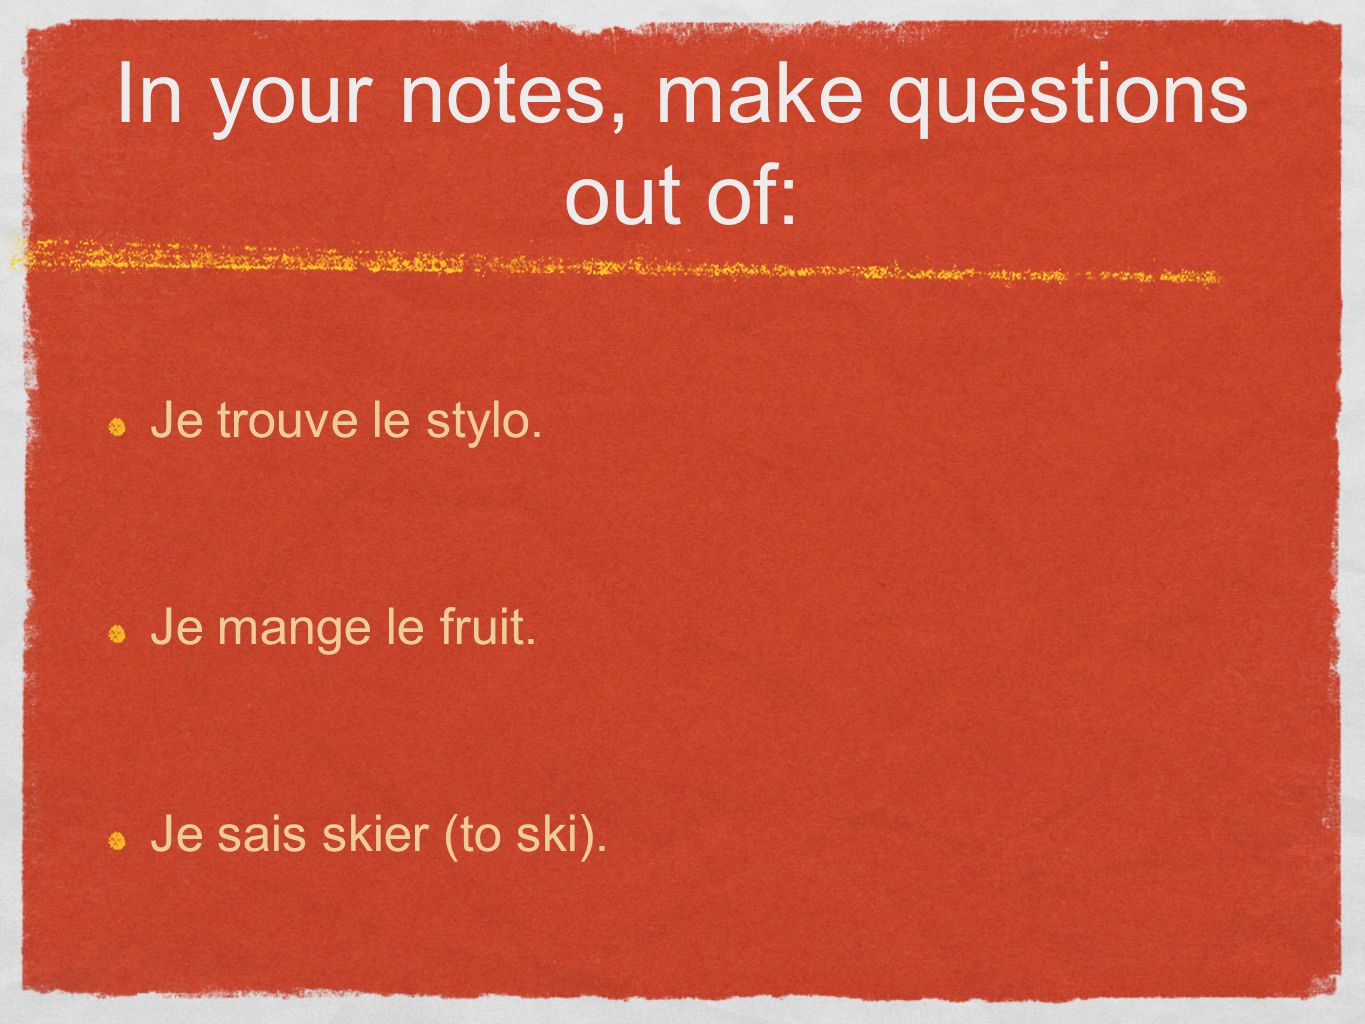 In your notes, make questions out of: Je trouve le stylo.